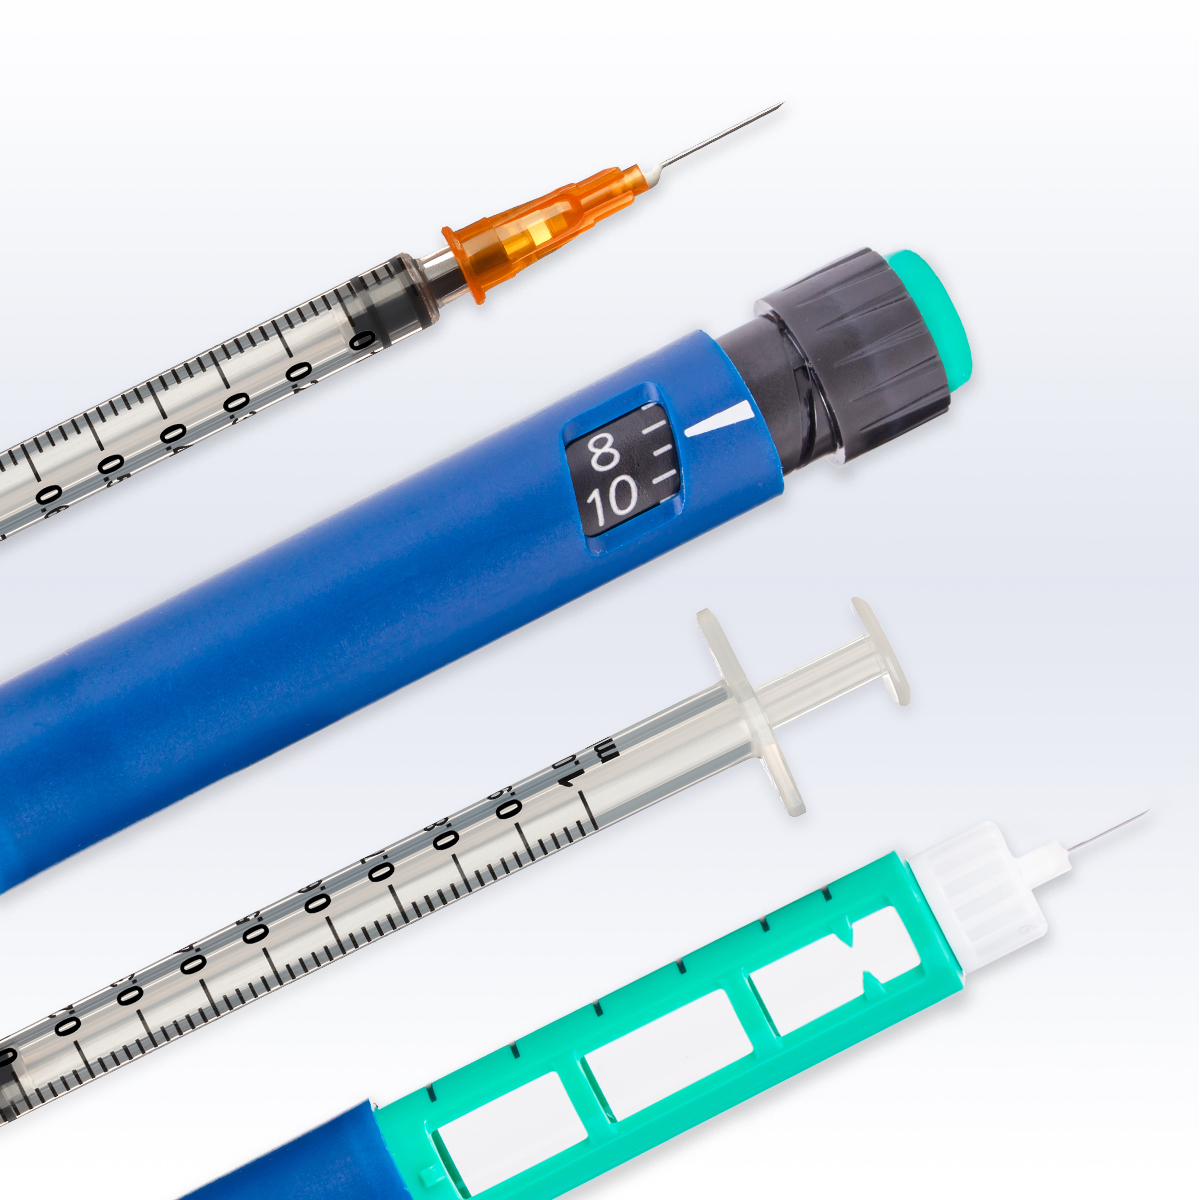 Insulin syringes and pens typically combine bolus insulin and basal insulin